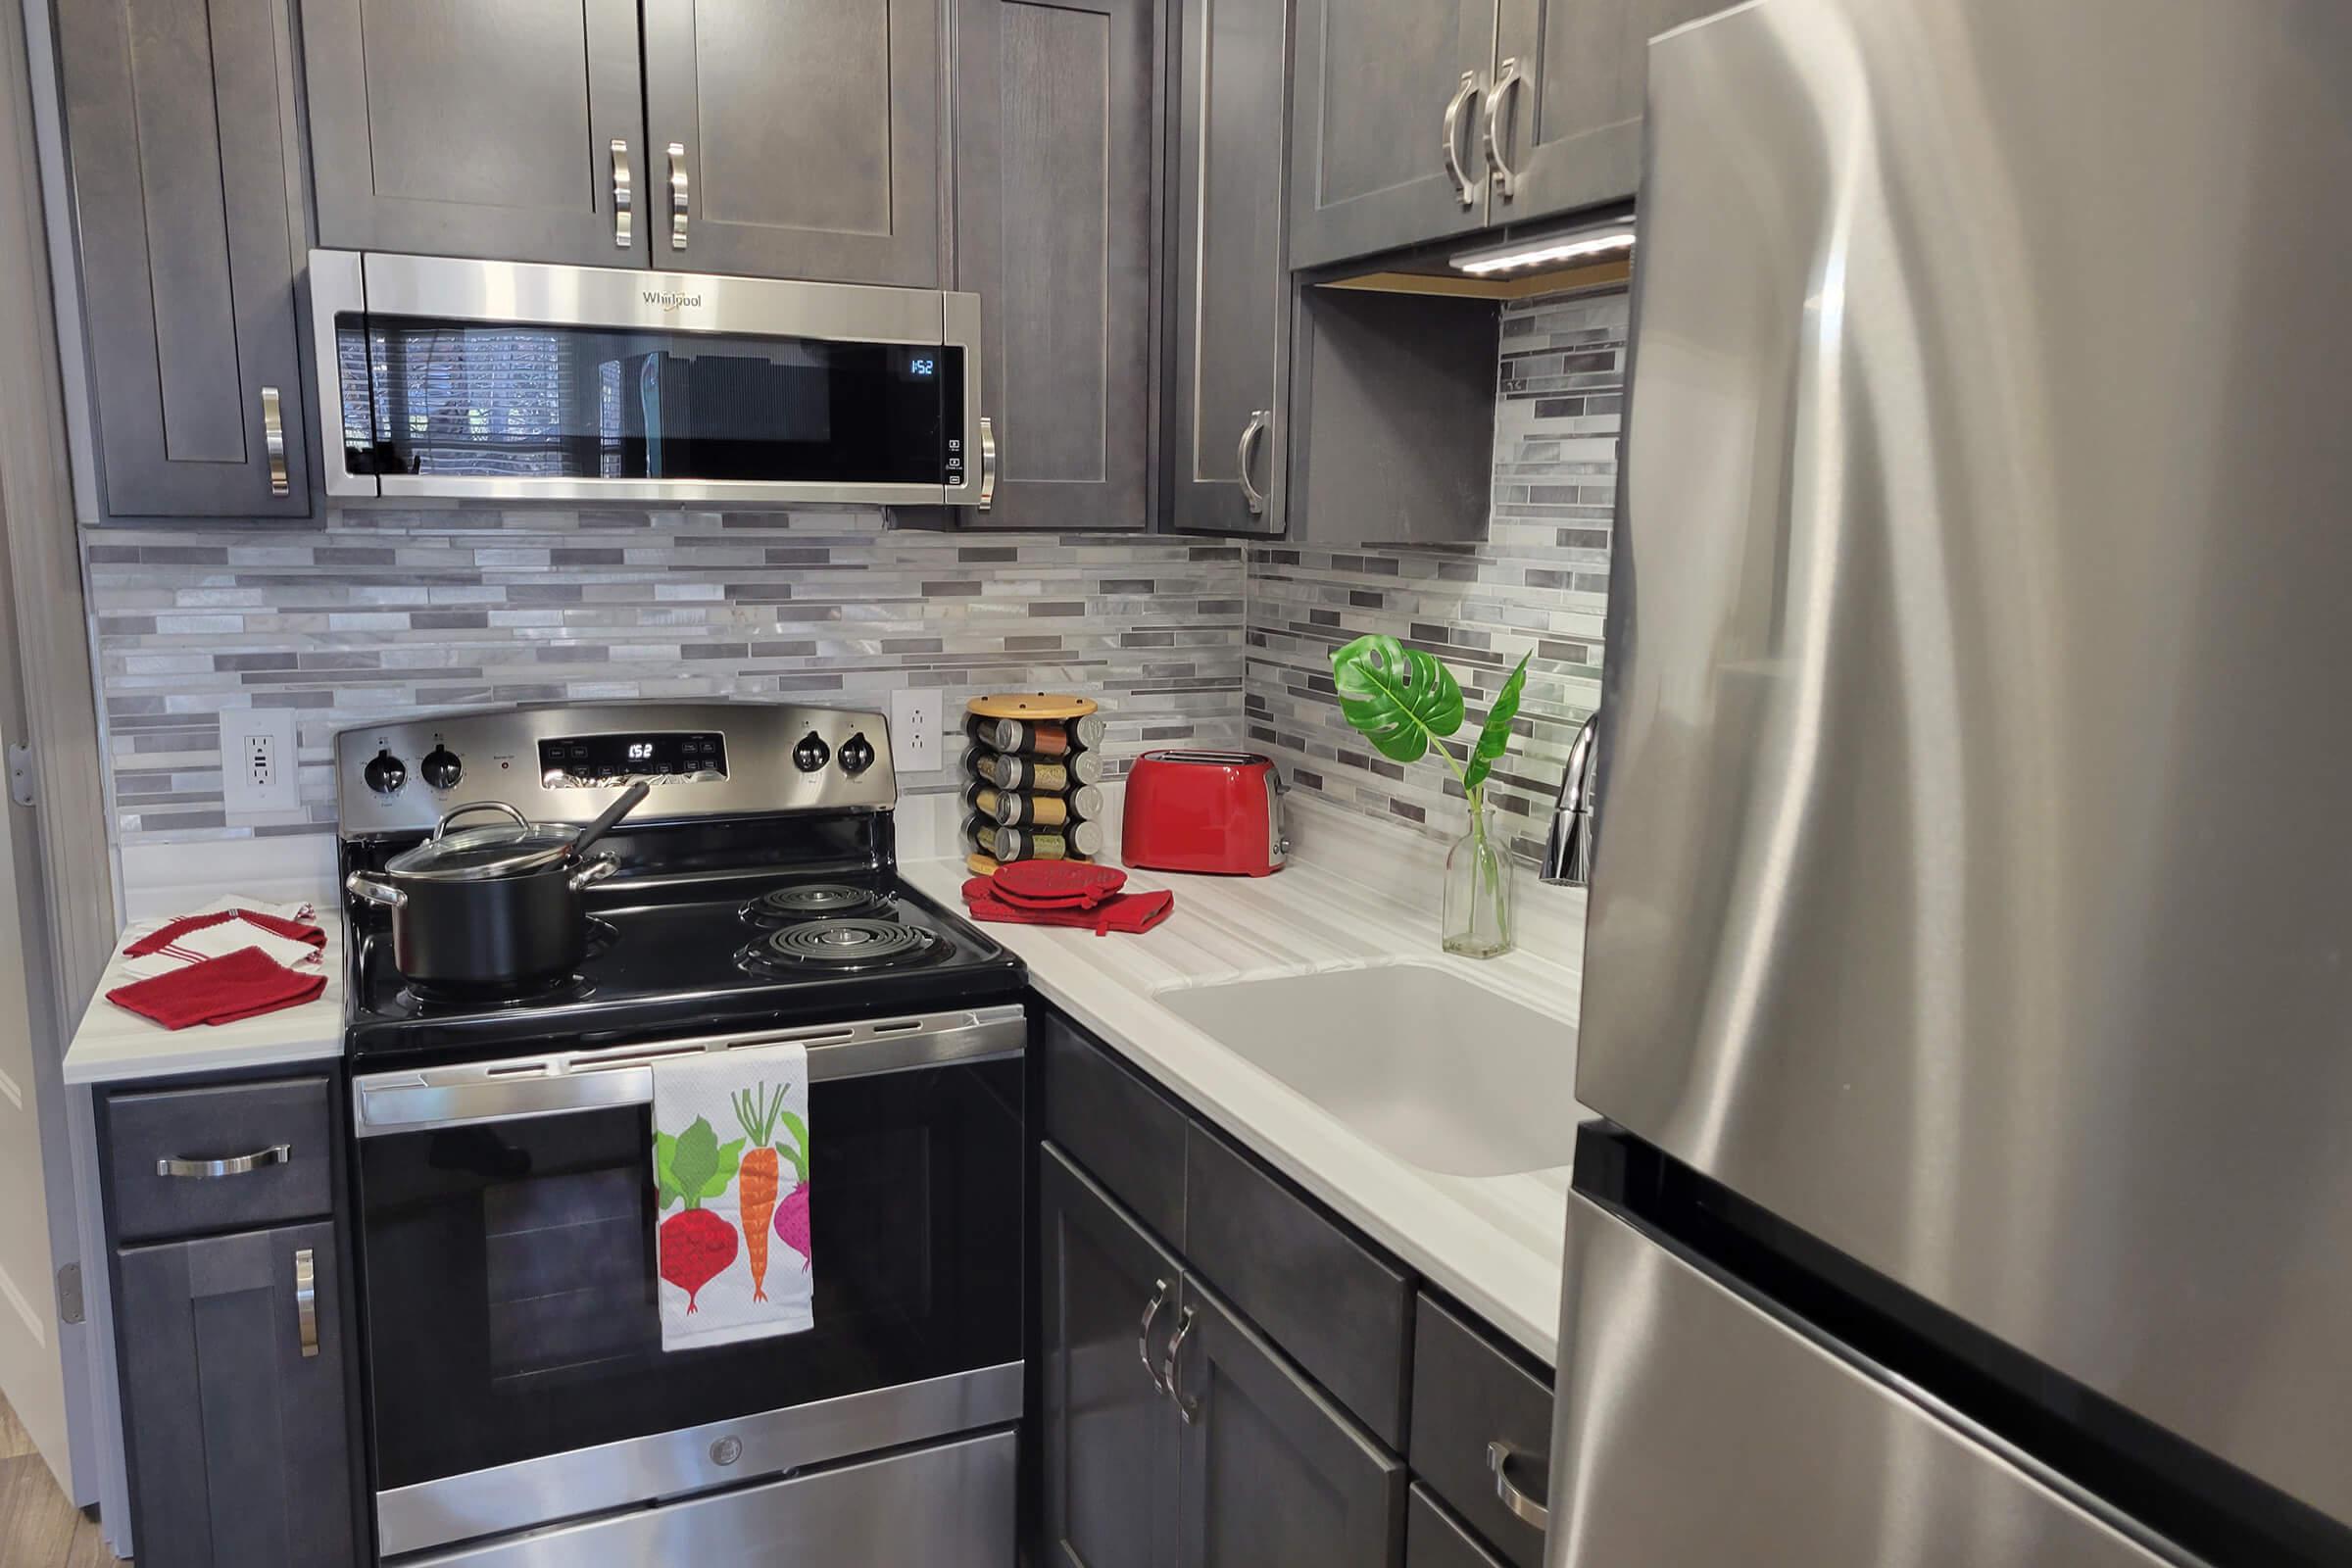 make a wonderful meal in your new stainless steel kitchen in Nashville, Tennessee